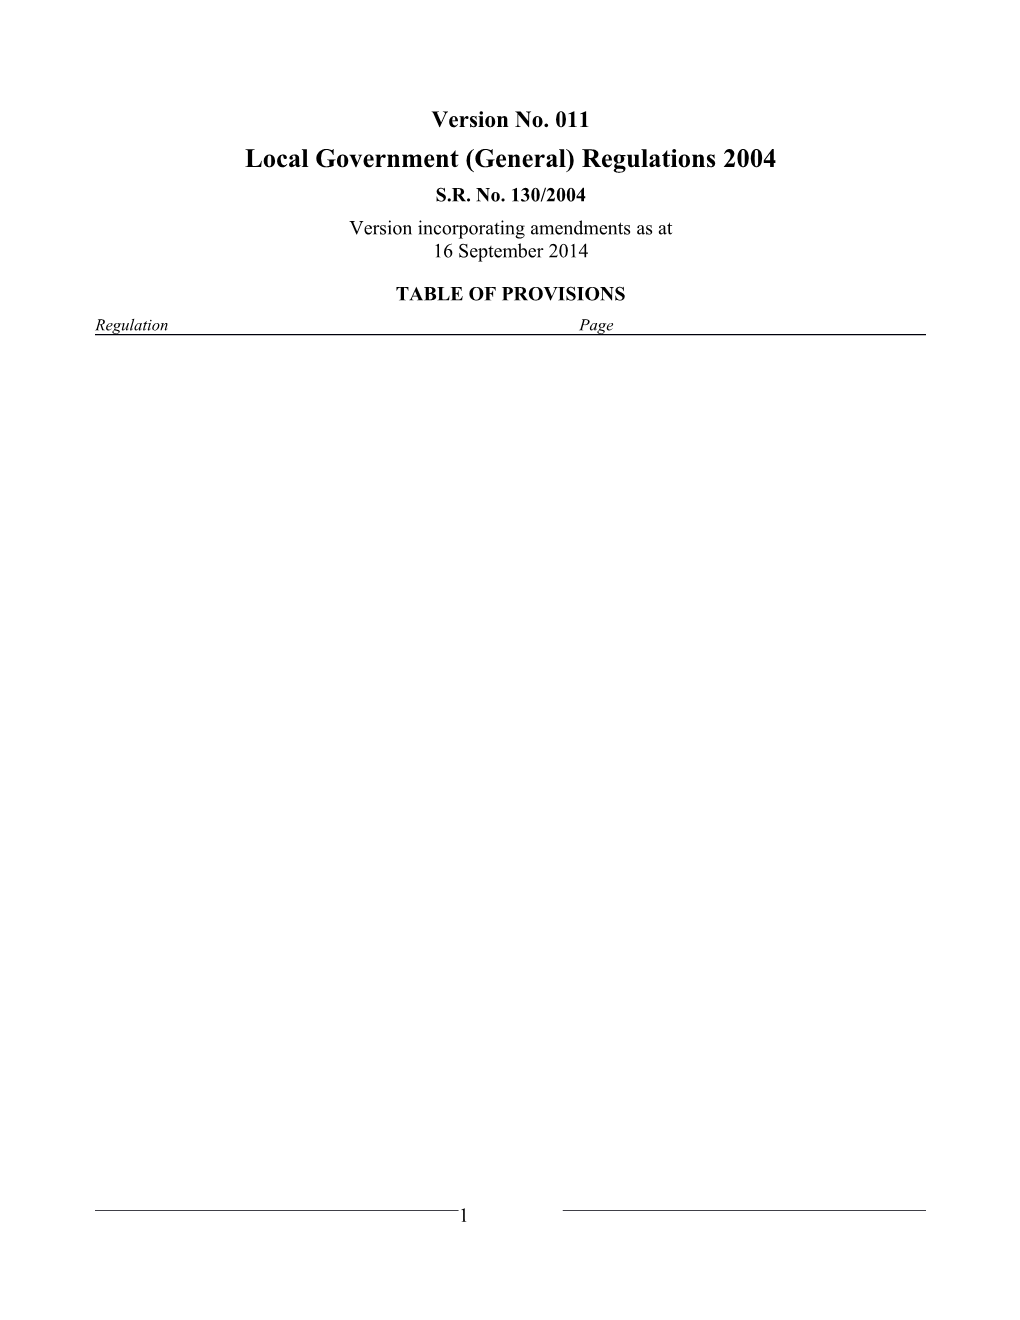 Local Government (General) Regulations 2004